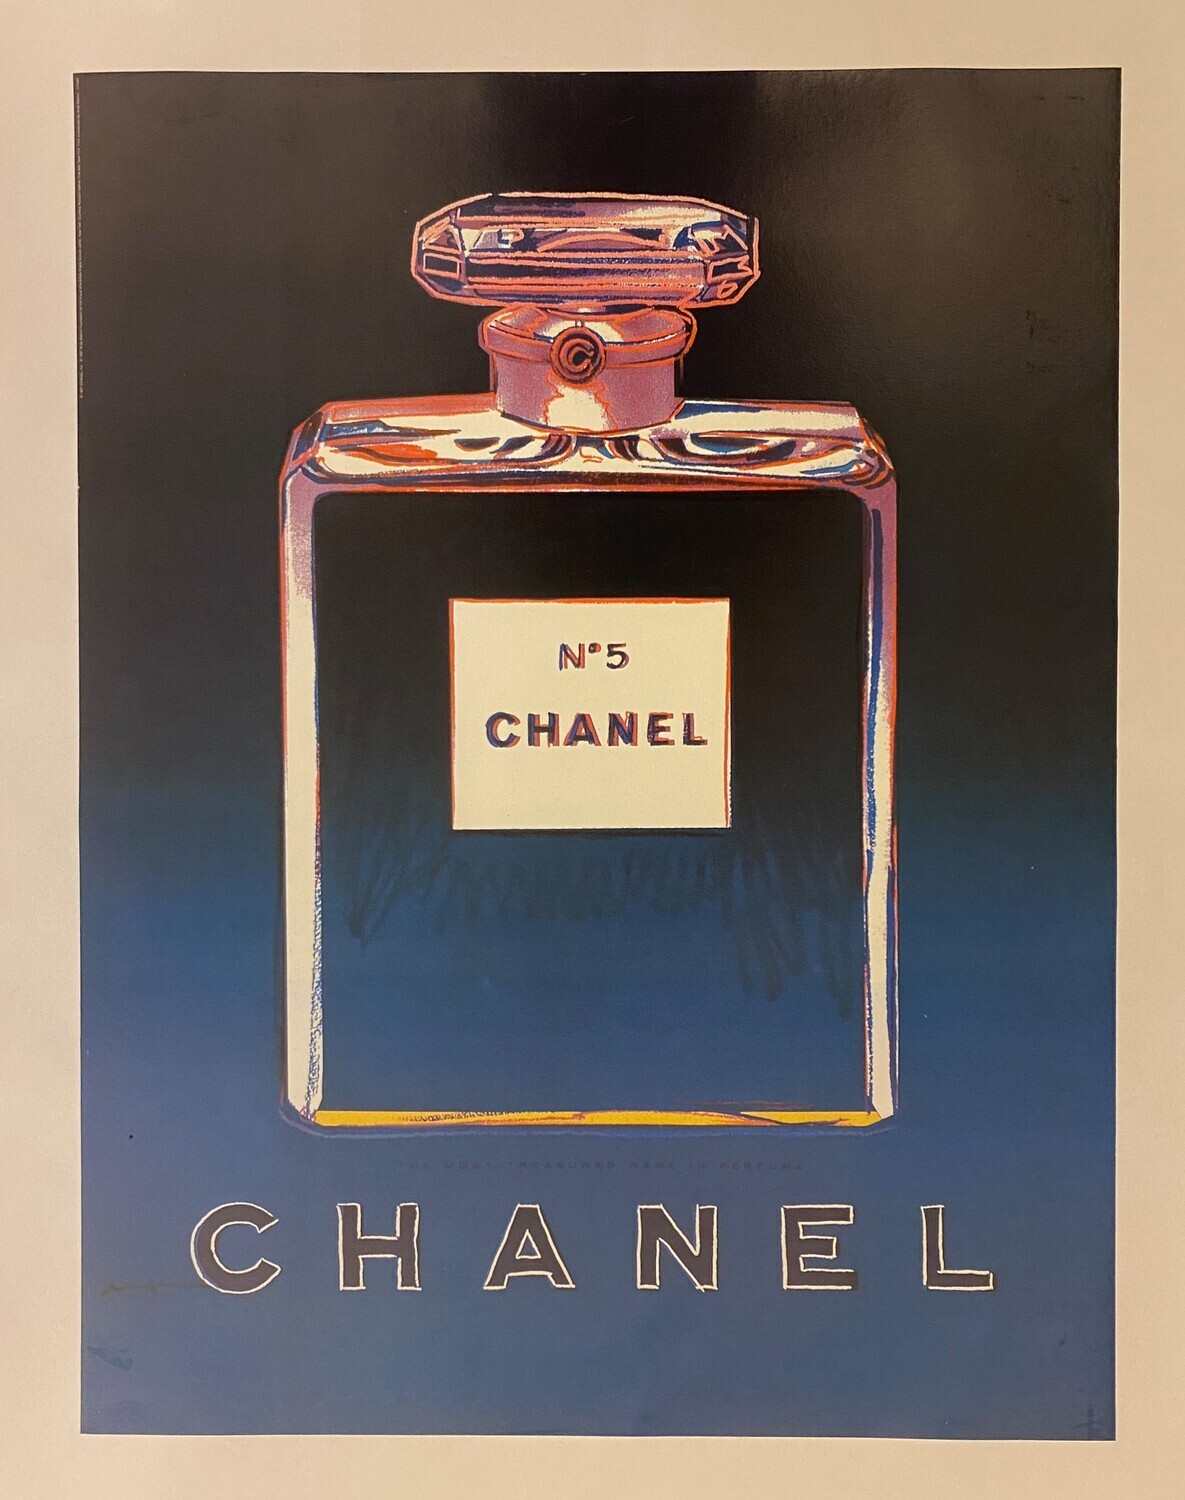 Andy Warhol, 1997 - CHANEL N.5 - BLUE - Advertising vintage poster - cm 72,5 x 56 - in 28,5 x 22